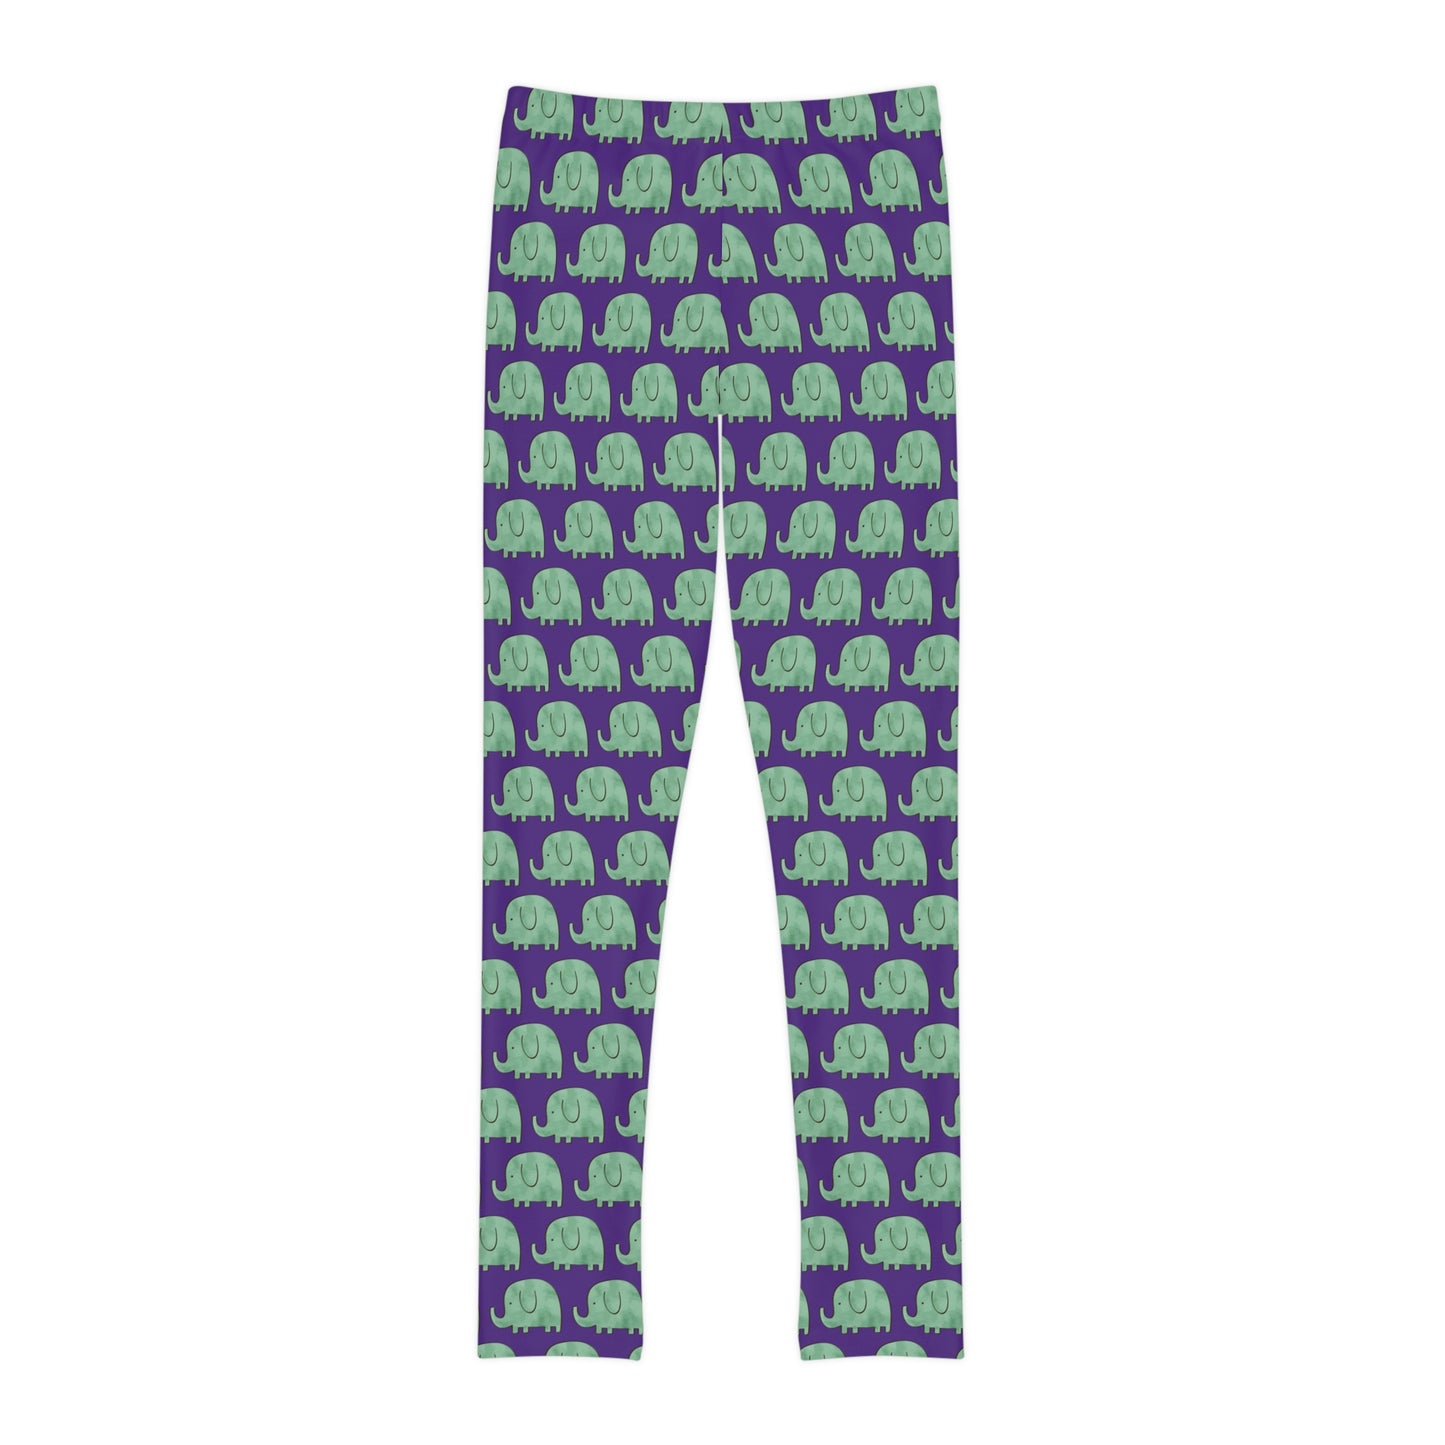 Elephant animal kingdom, Safari Youth Leggings,  One of a Kind Gift - Unique Workout Activewear tights for kids, Daughter, Niece  Christmas Gift